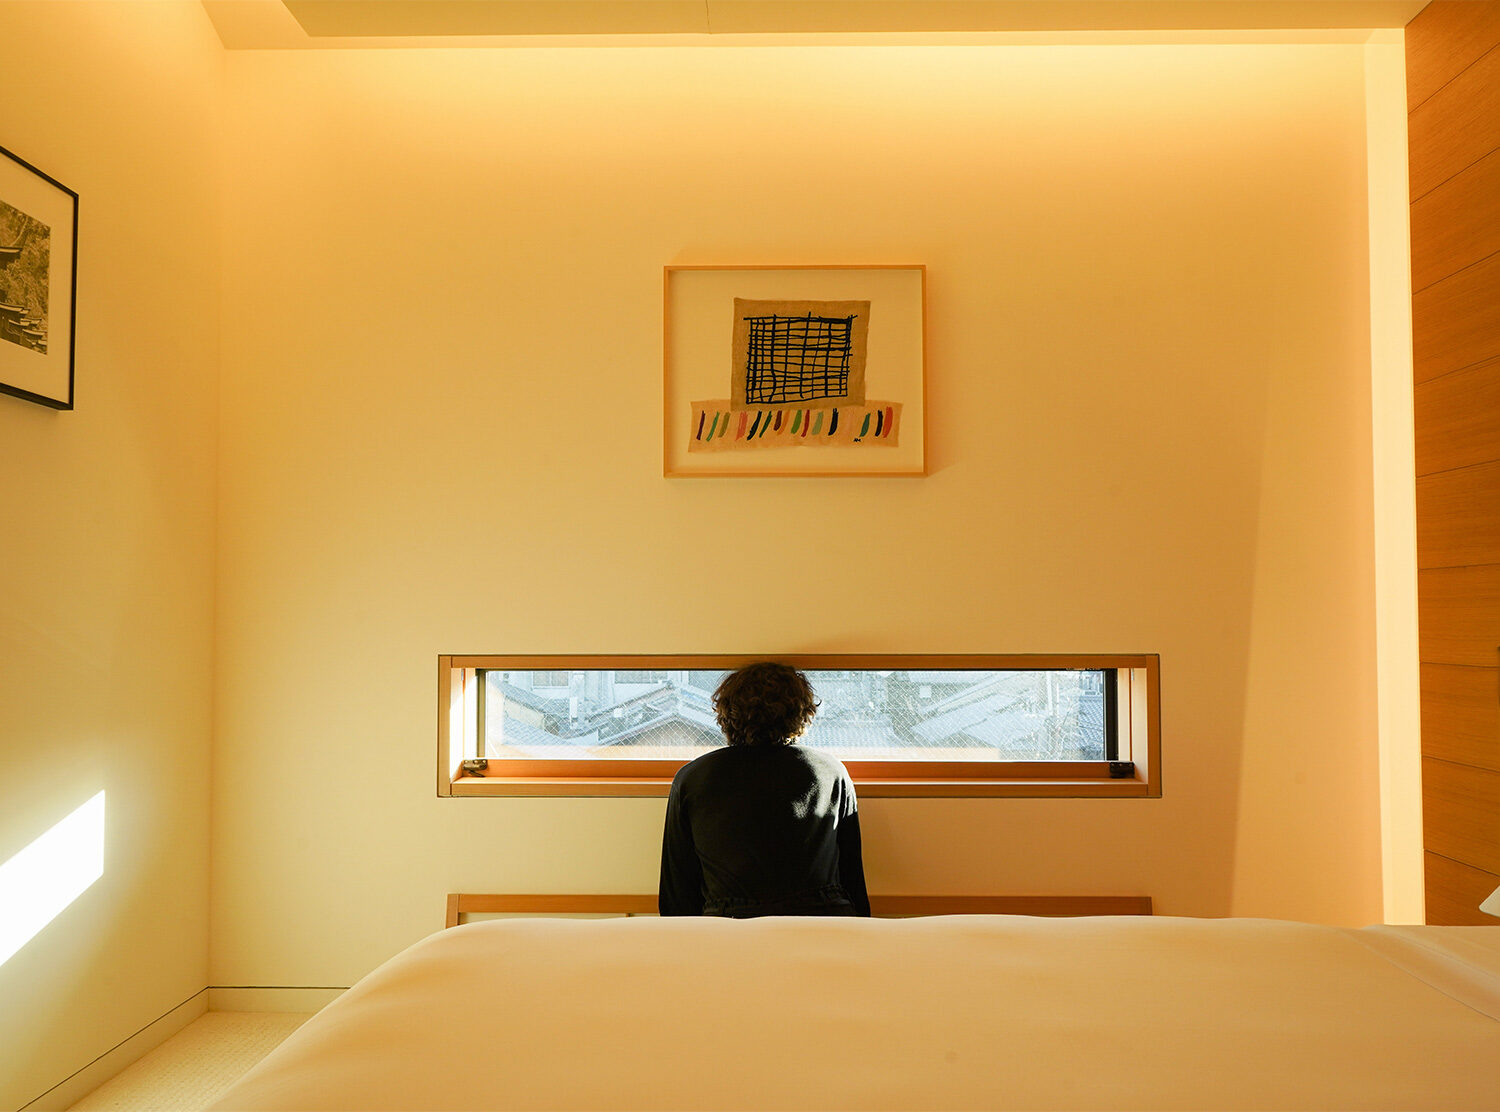 The Shinmonzen All the natural materials are complemented with sunlight, from dawn to dusk. The room breathes life